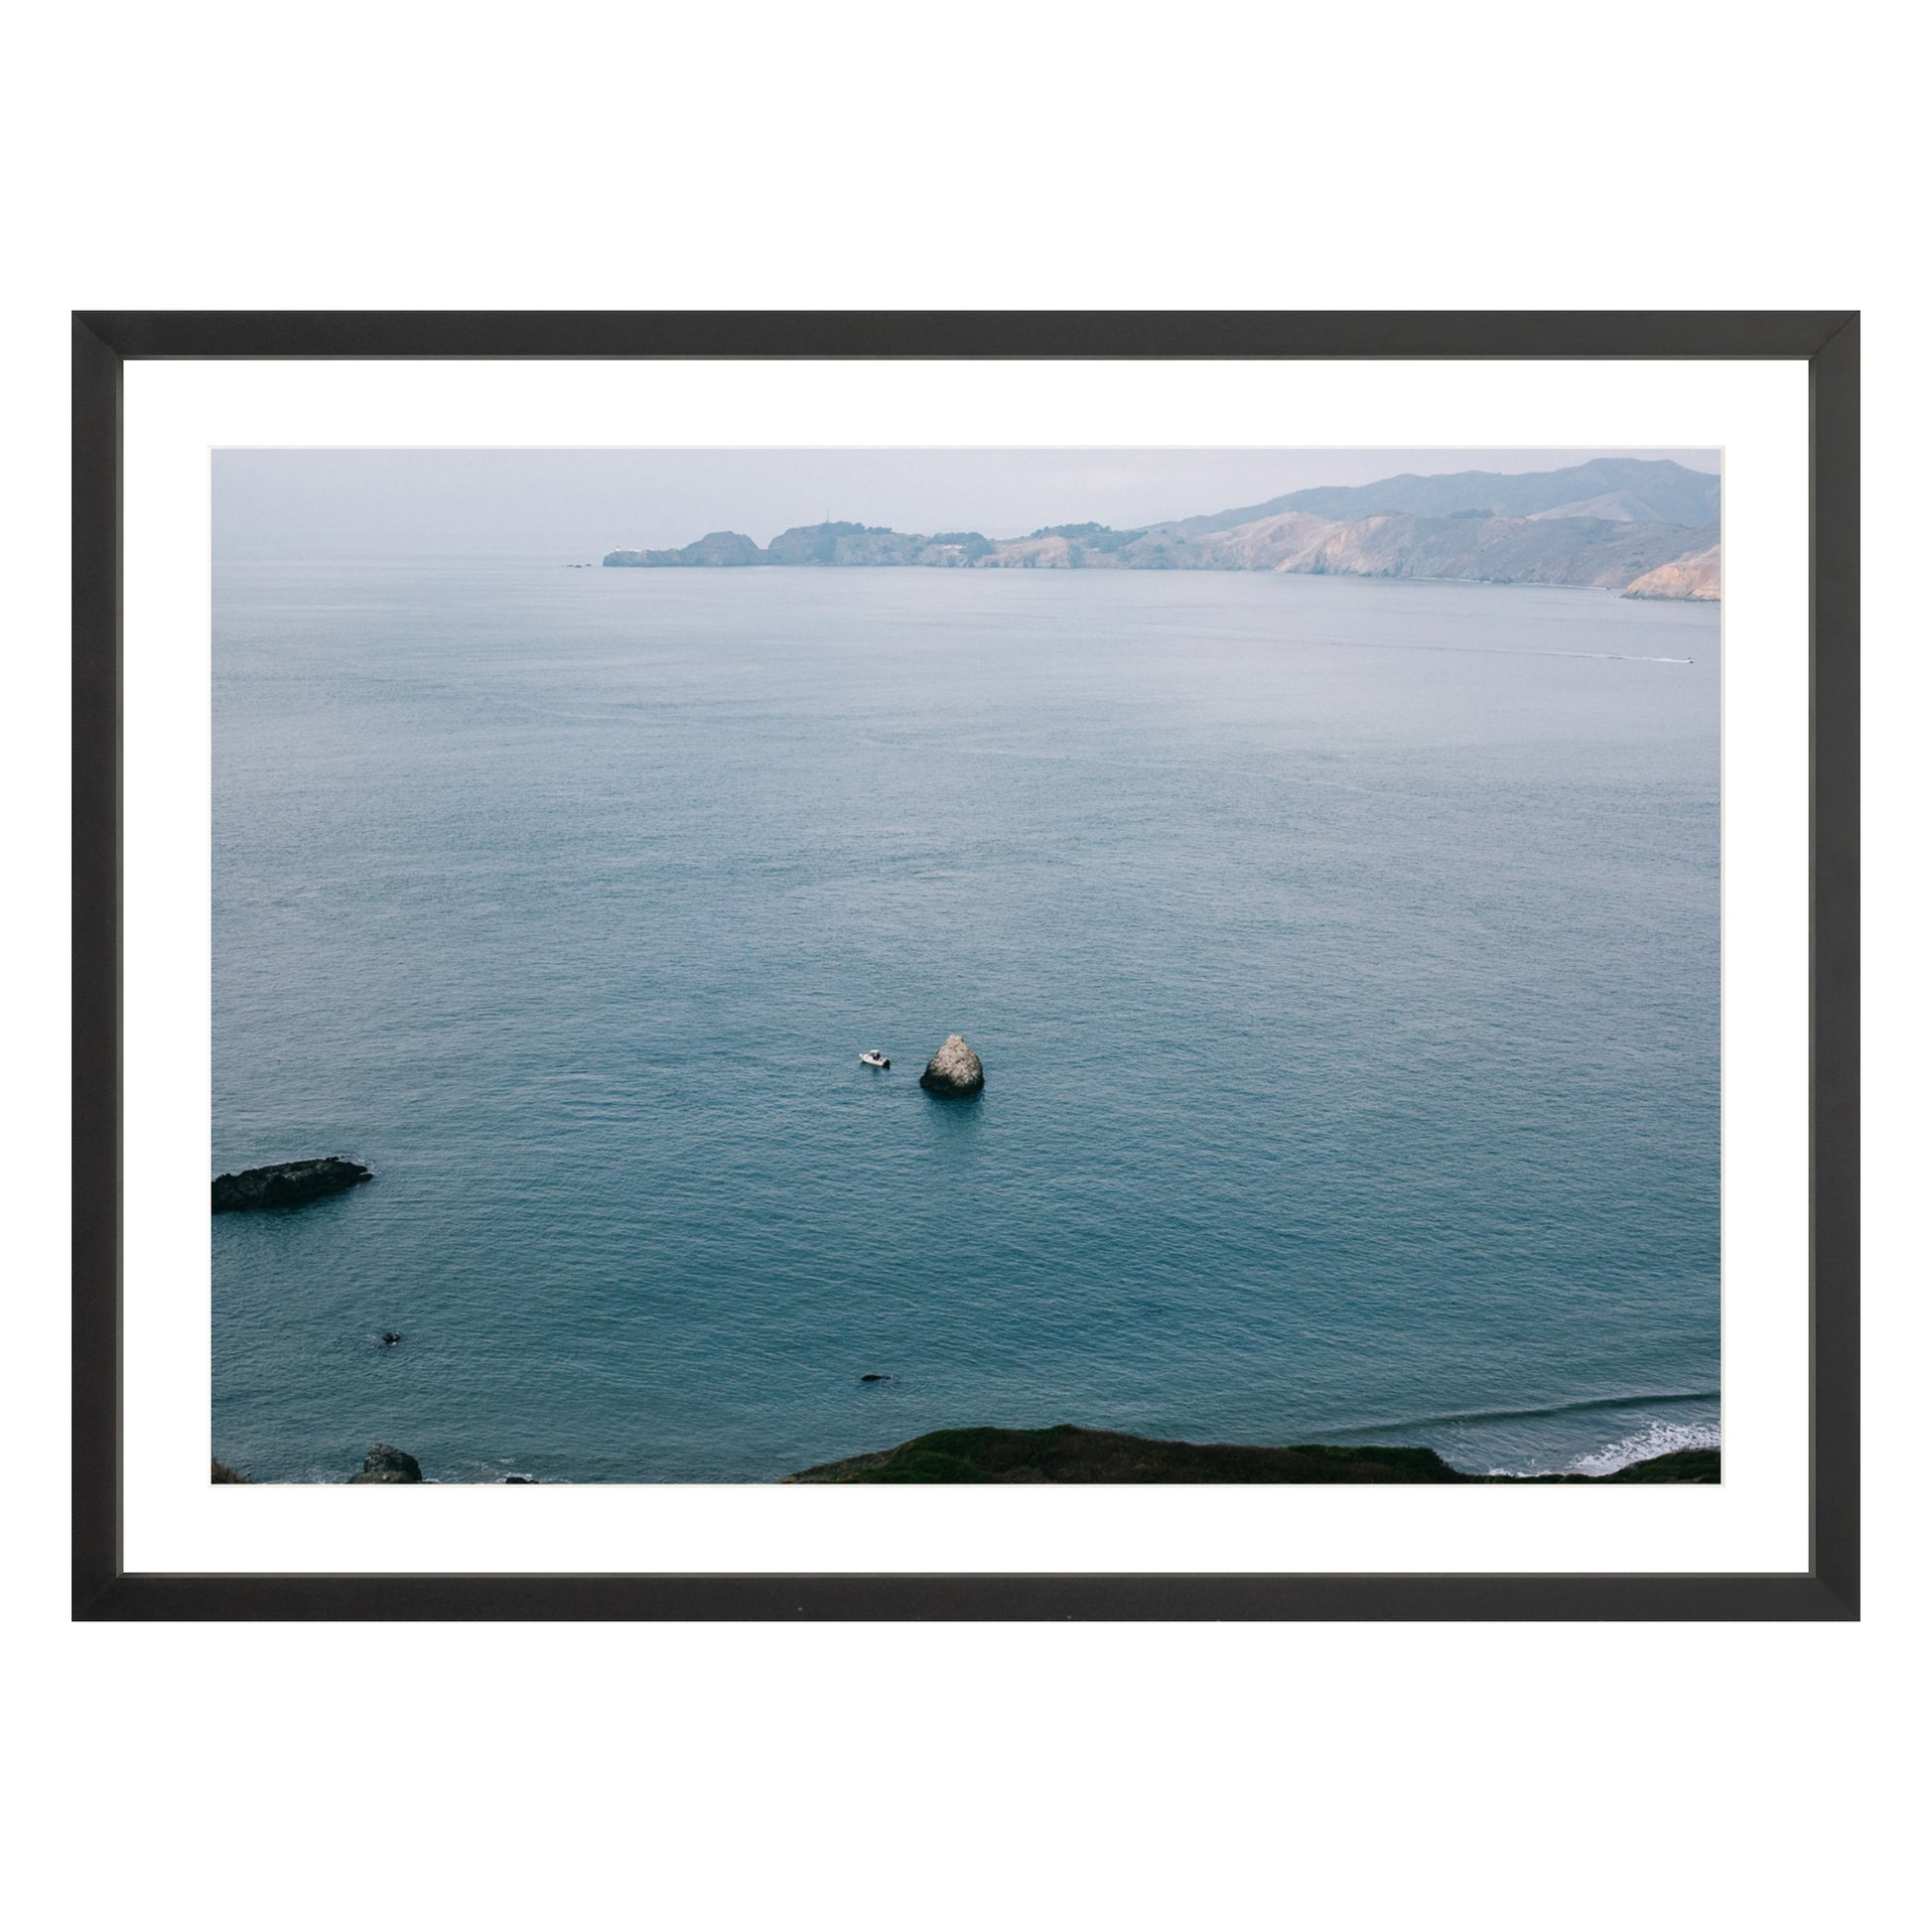 Photograph of San Francisco Bay in black frame with white mat